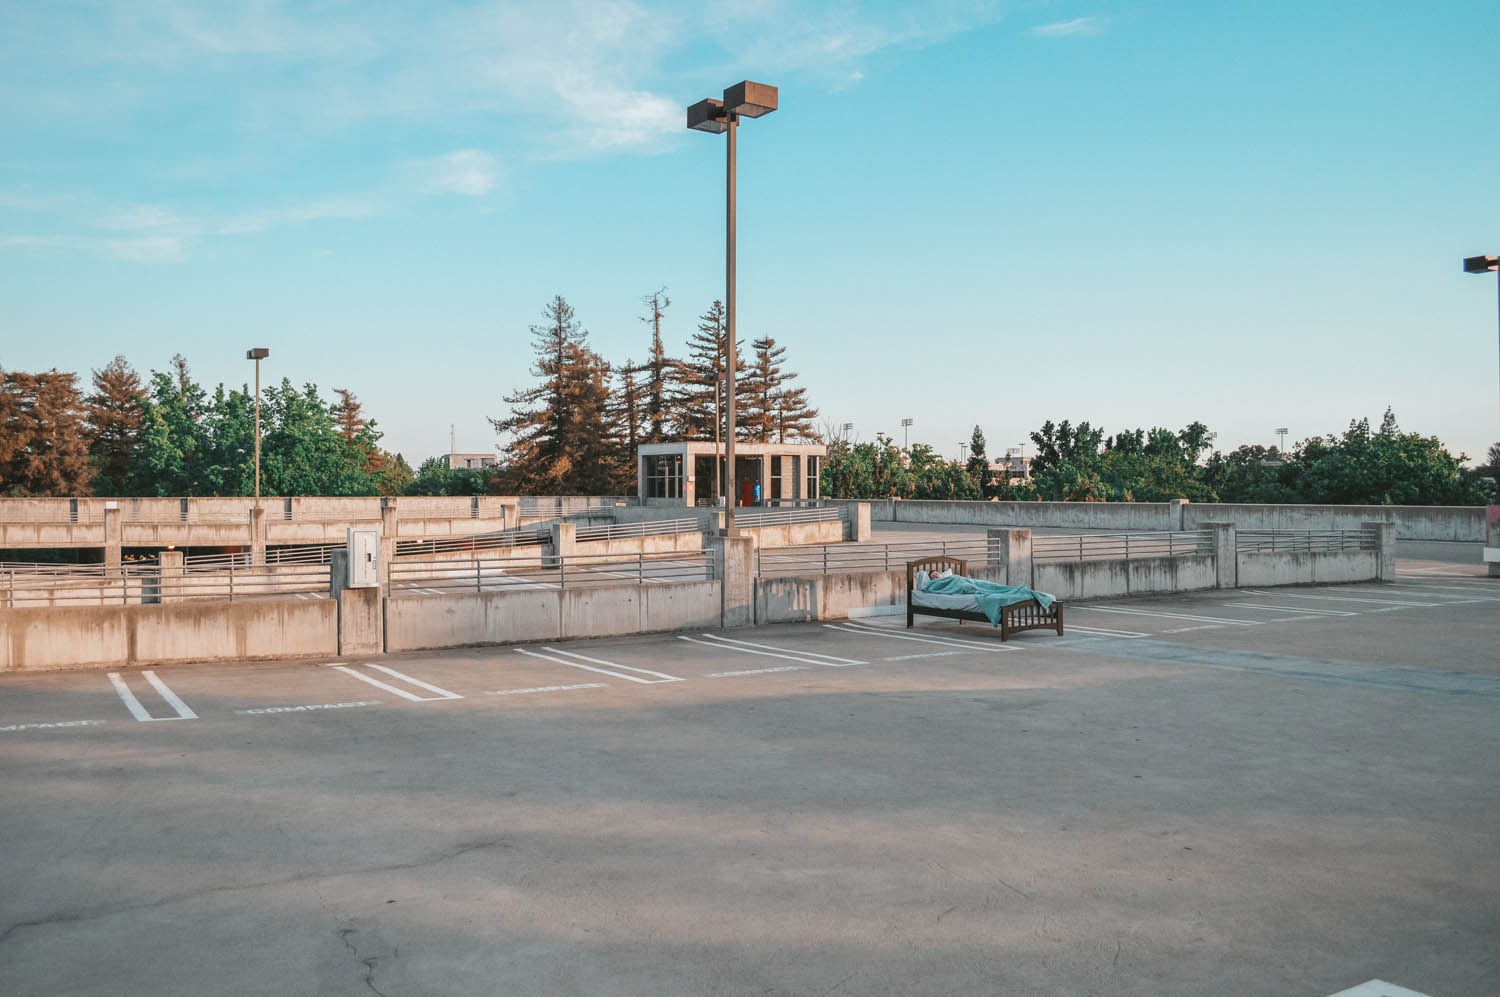 A wide shot photo of an empty parking lot. In the distance, there is a bed in one of the parking spaces with a person sleeping in it.